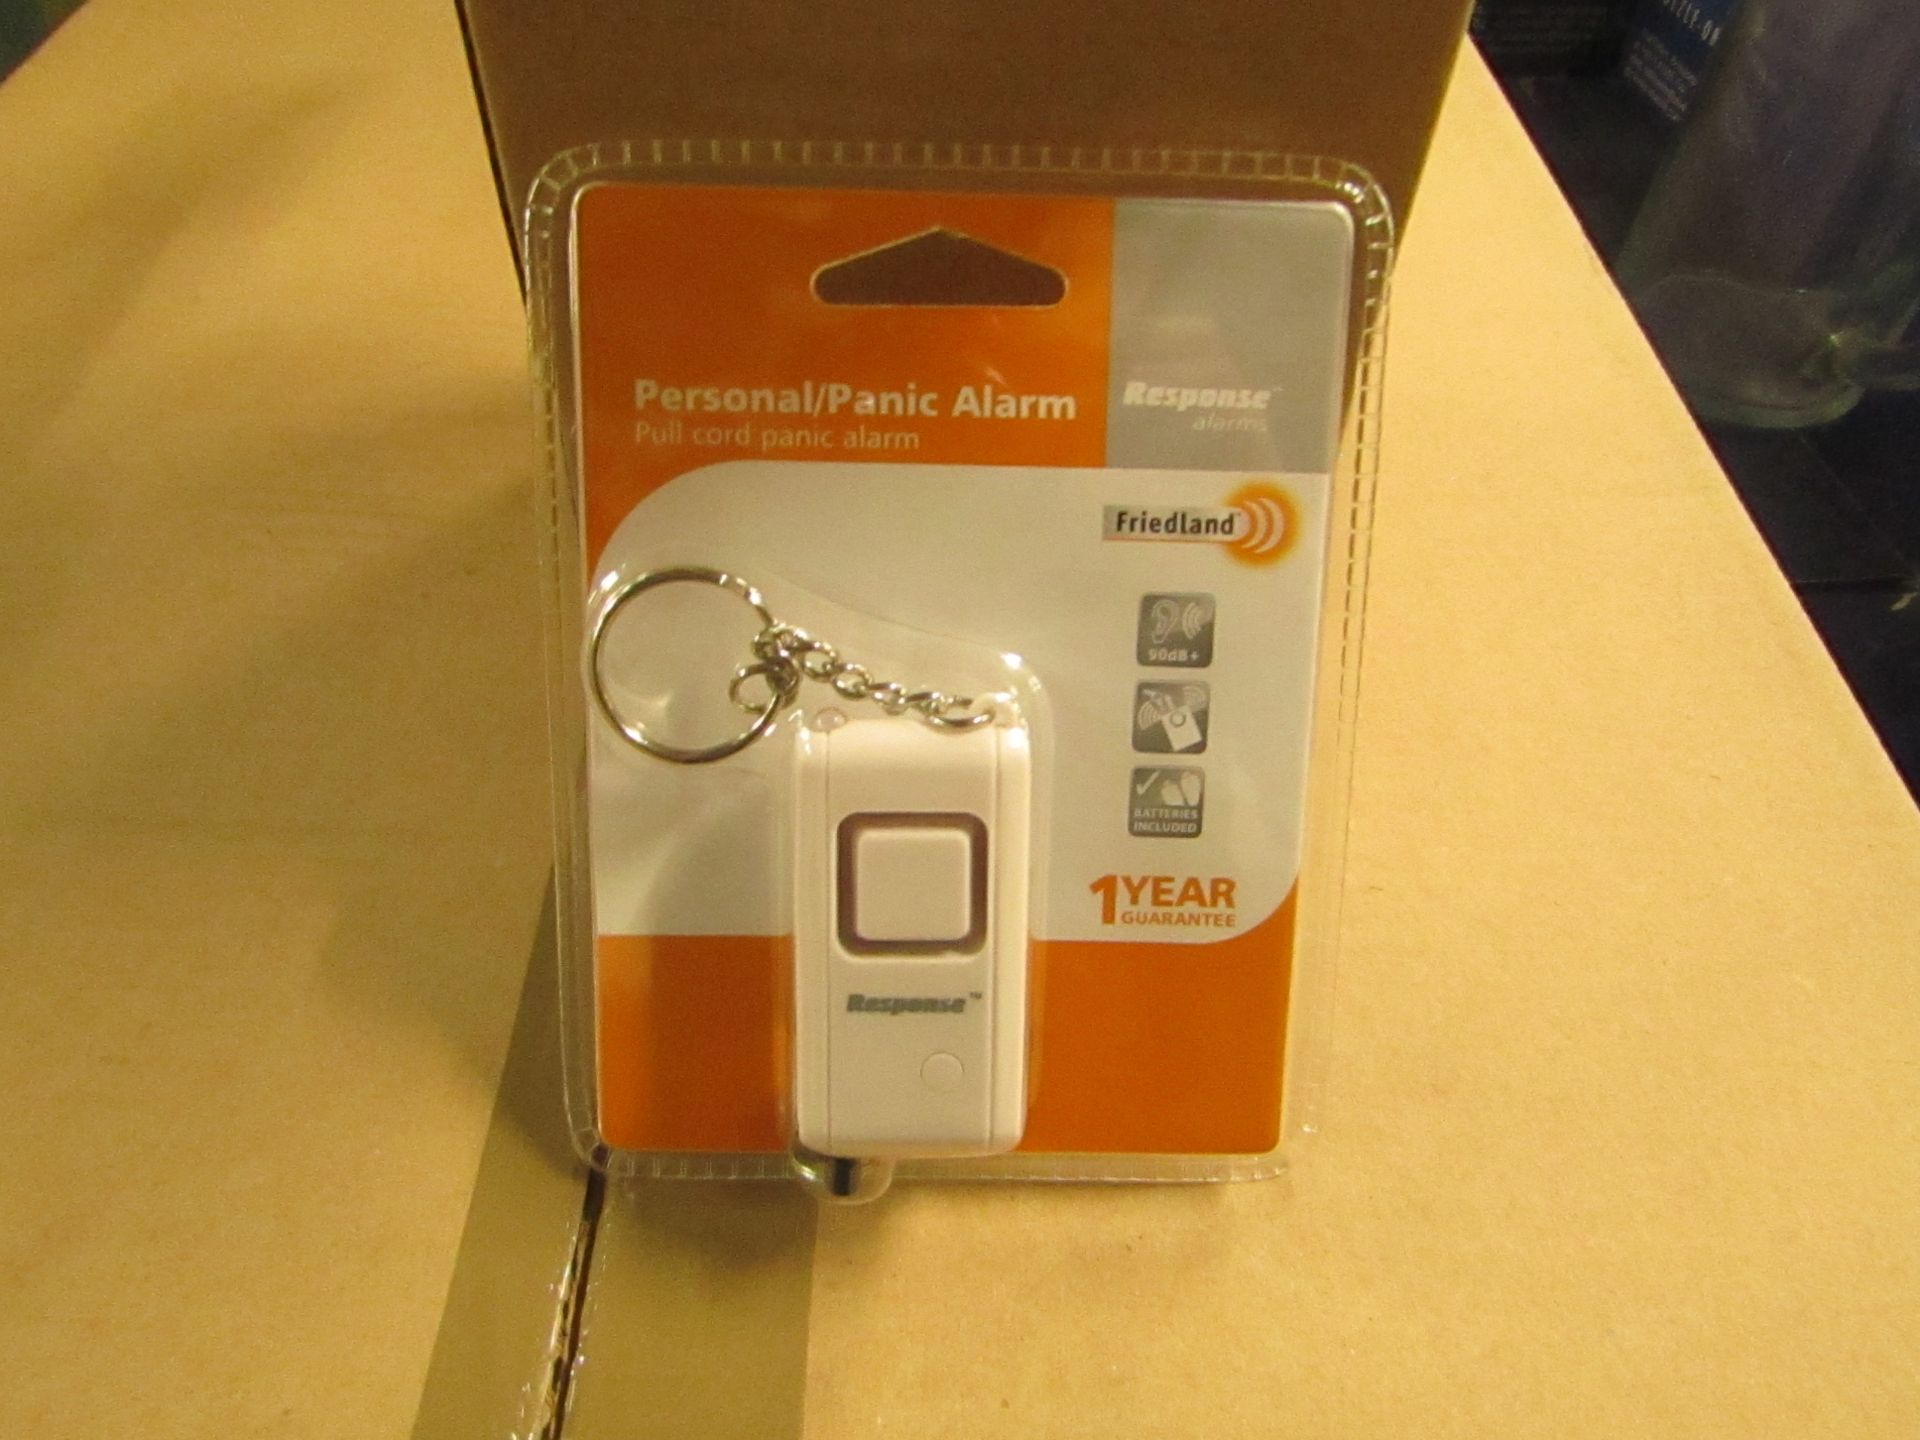 36x Friedland personal panic alarm, new and boxed..